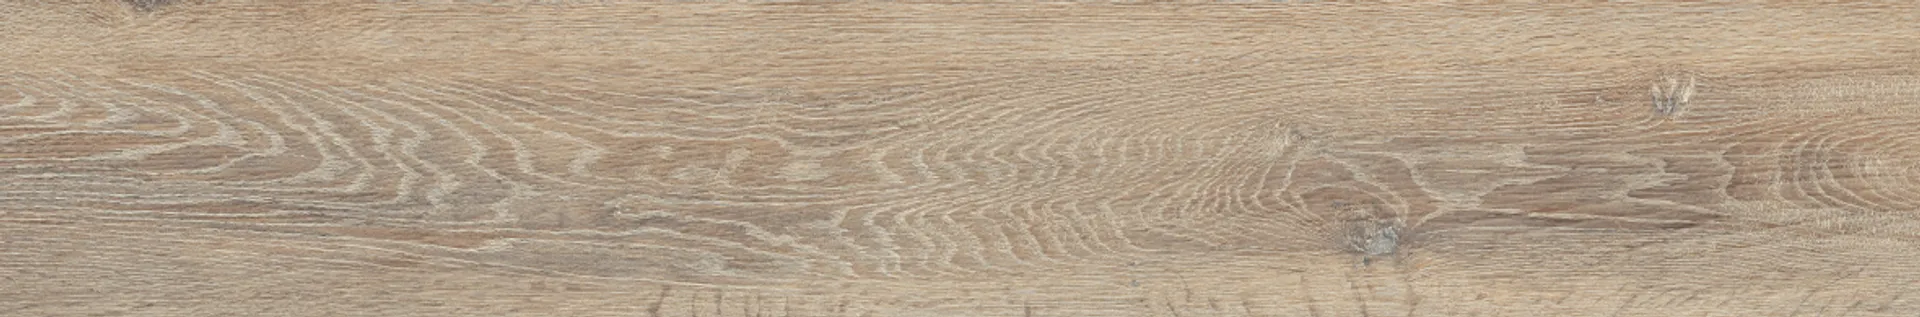 Gres Classic Oak cold brown mat rectified 14,7x89 Opoczno